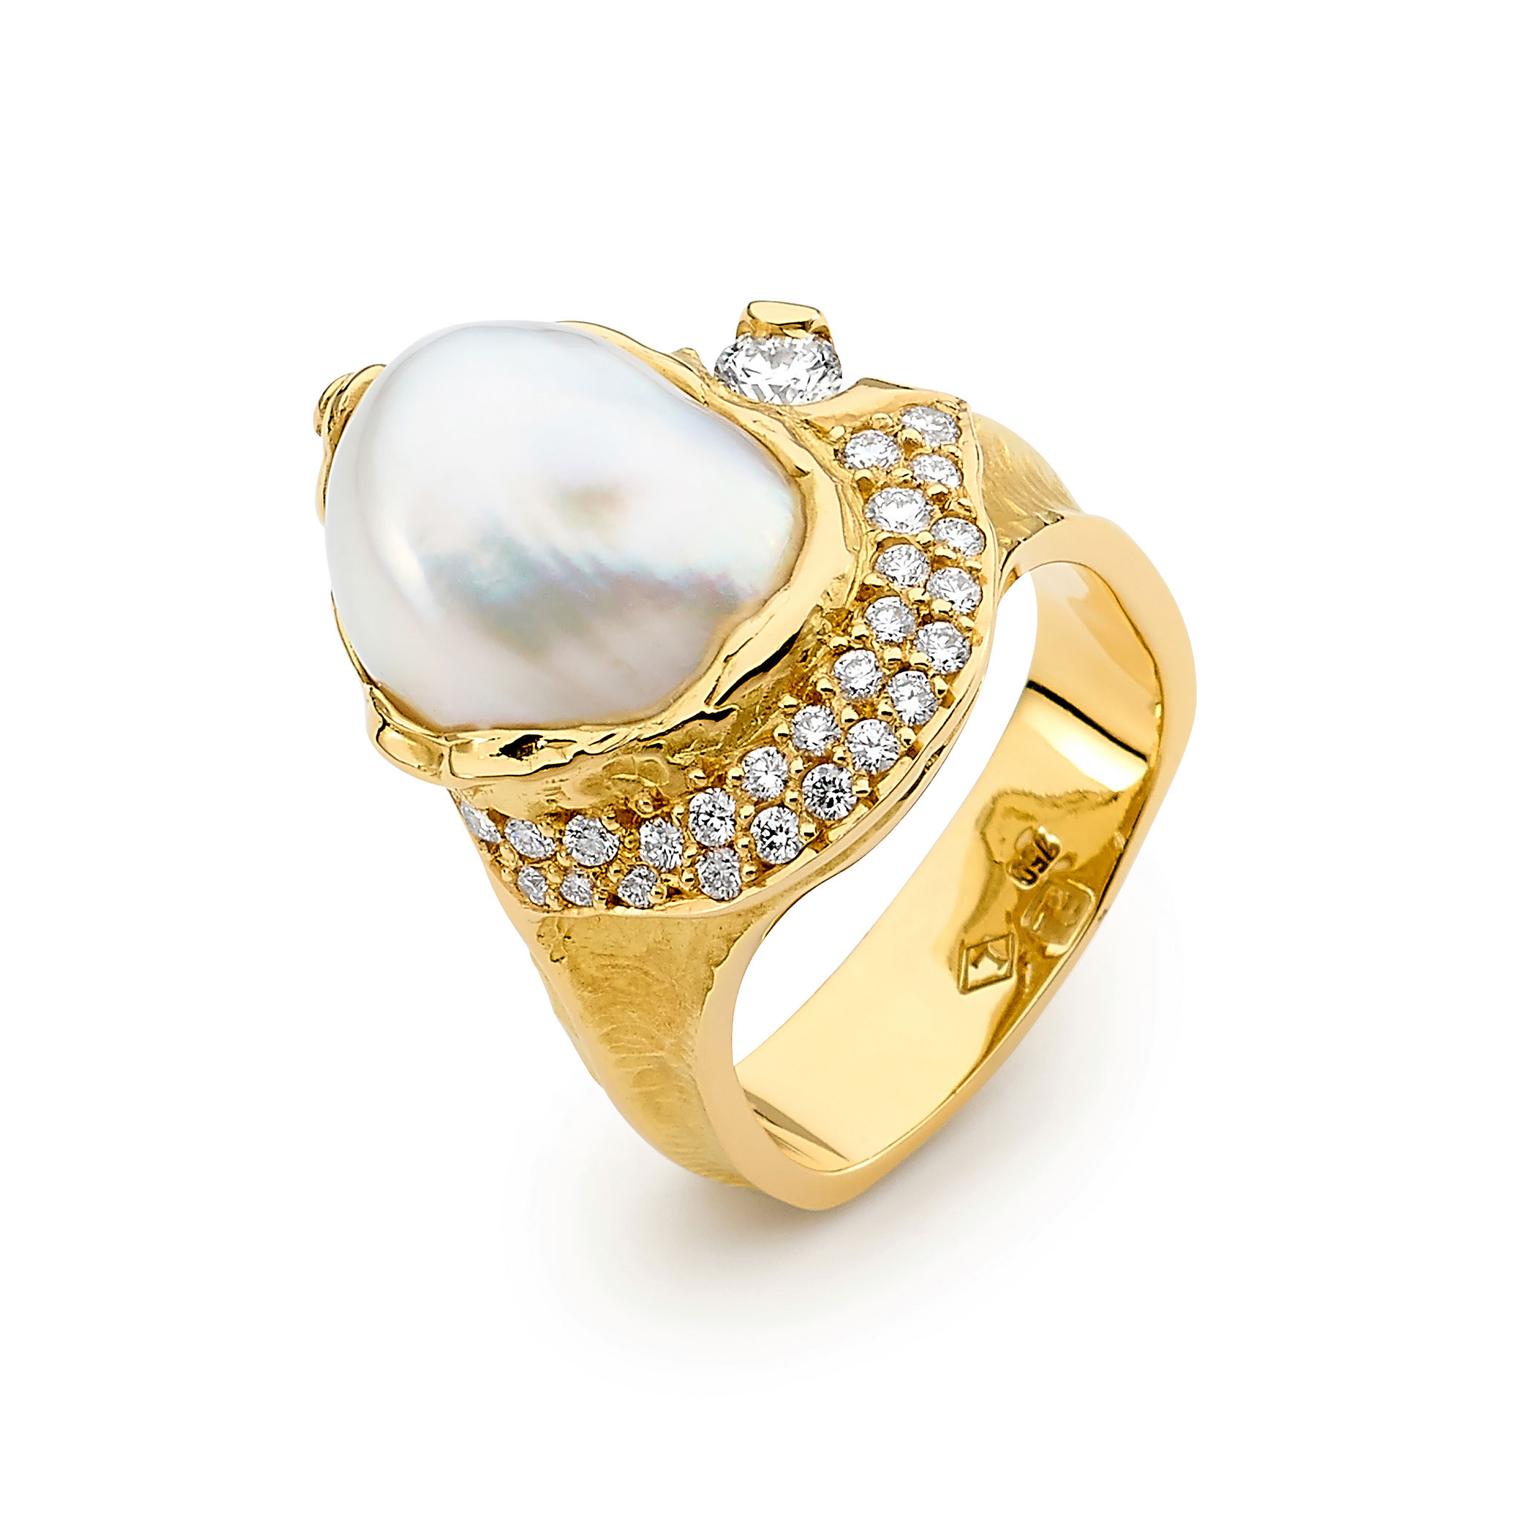 Australian pearls beguile the country's top designers with their ...